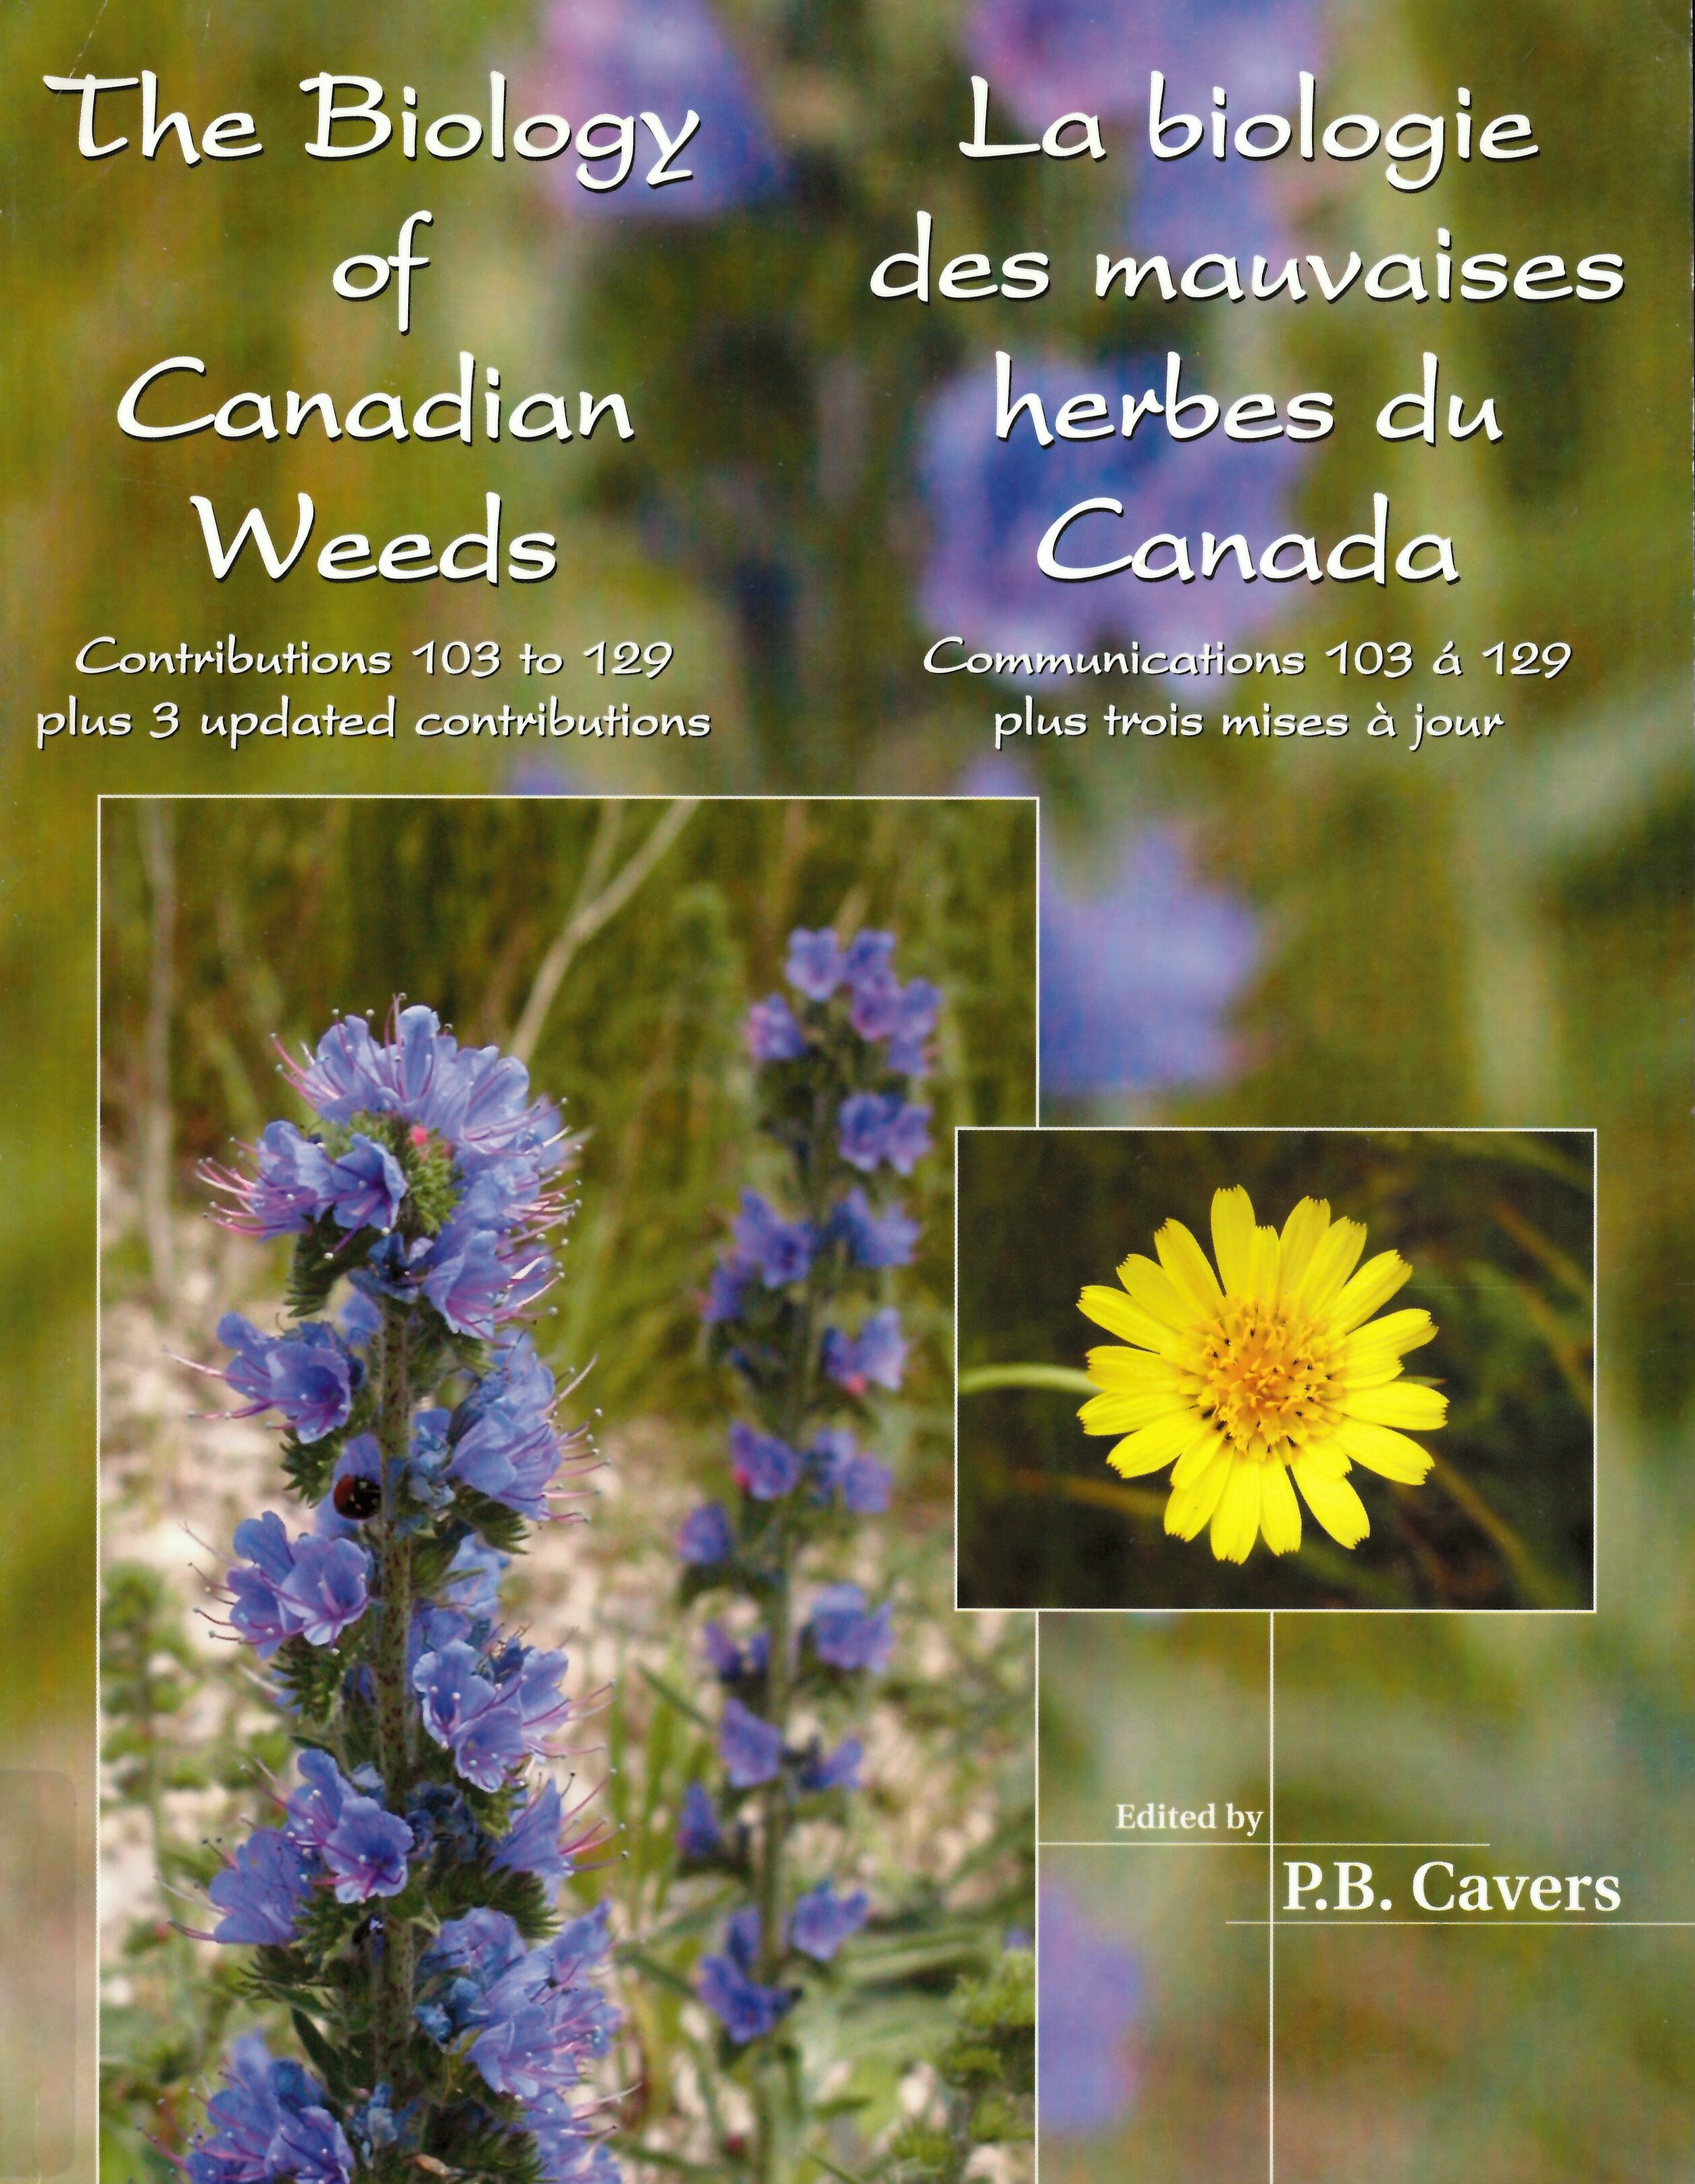 The biology of Canadian weeds : contributions 103-129 plus three updated contributions